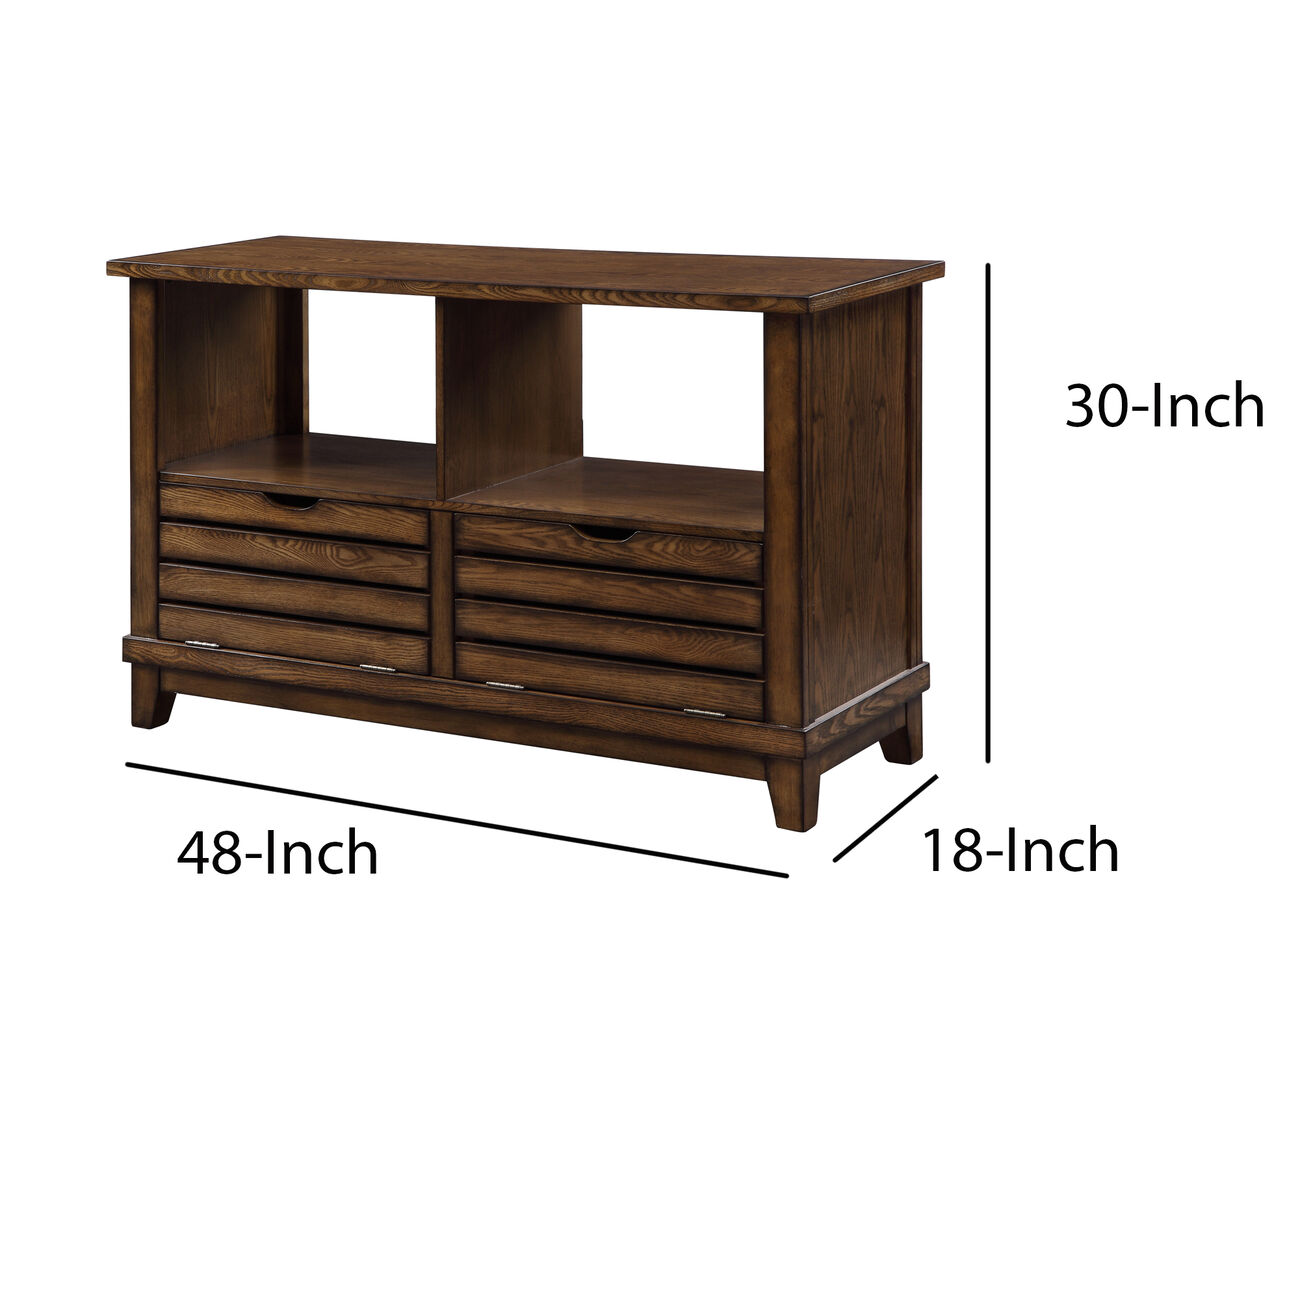 Slatted Front Sofa Table with Two Drawers and Two Shelf, Brown